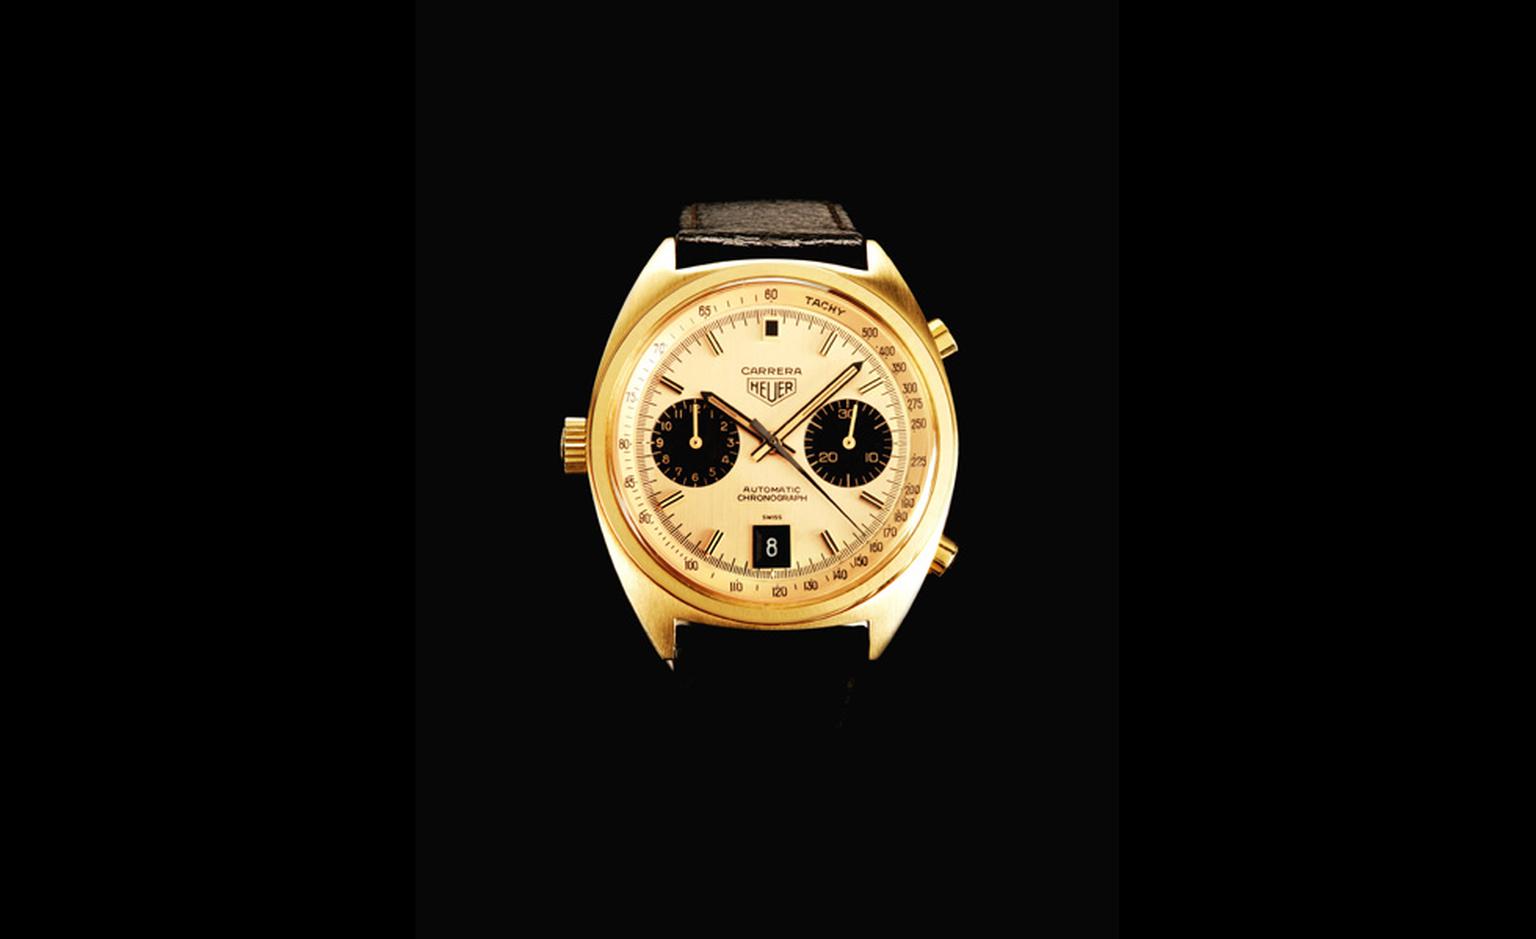 Bonham's Lot 96. A fine 1972 Heuer 18ct gold Carrera automatic chronograph that sold for £22,800, estimate was £7,000 to £9,000